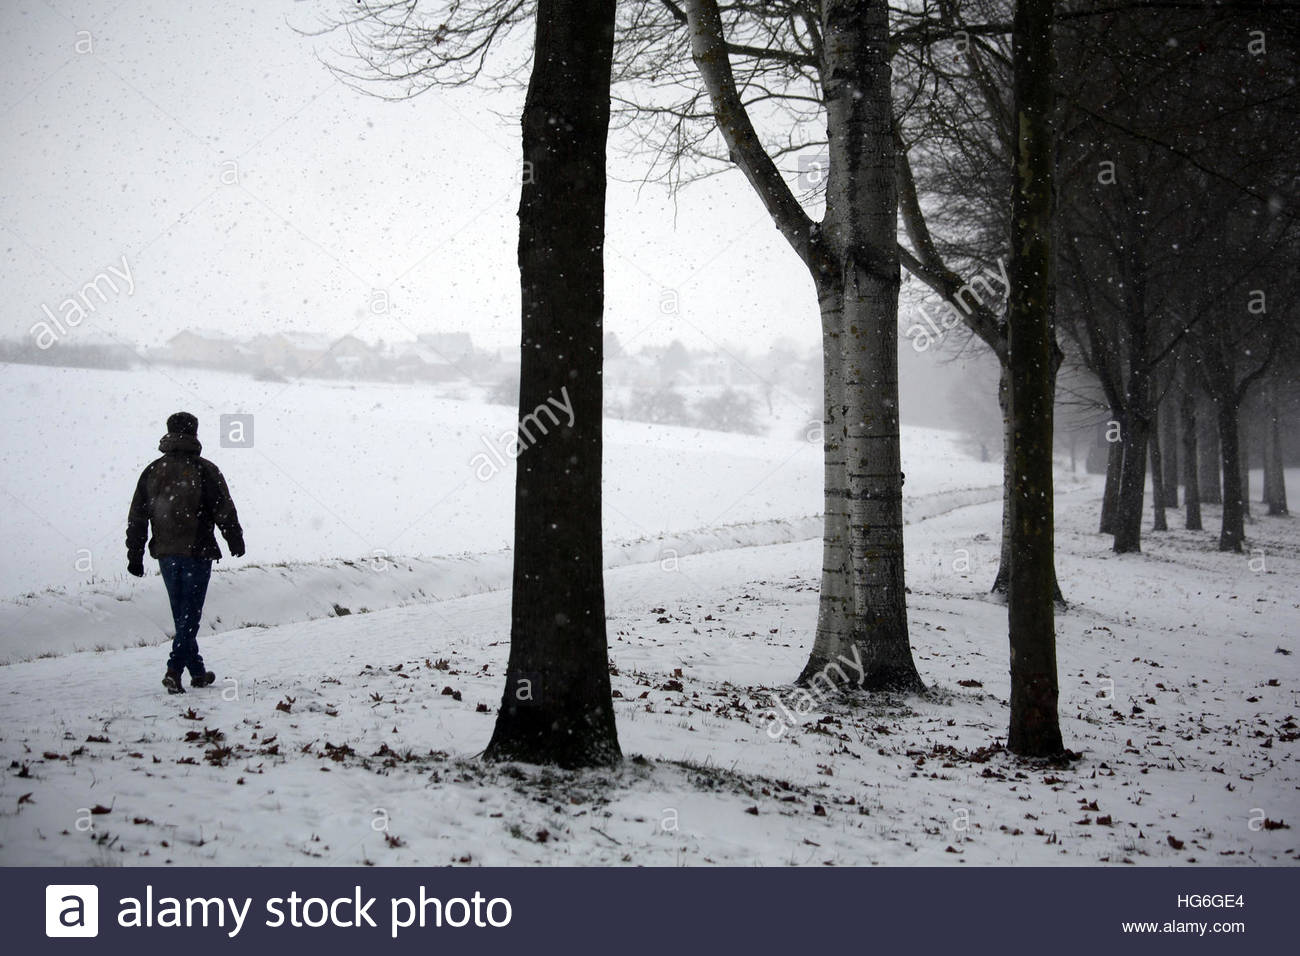 Northern Bavaria, Germany. 5th Jan, 2017. Heavy snow falls have arrived in Northern Bavaria after an unusually mild start to winter over Christmas. Weather forecasters are predicting further heavy falls into next week. © reallifephotos/Alamy Live News Stock Photo